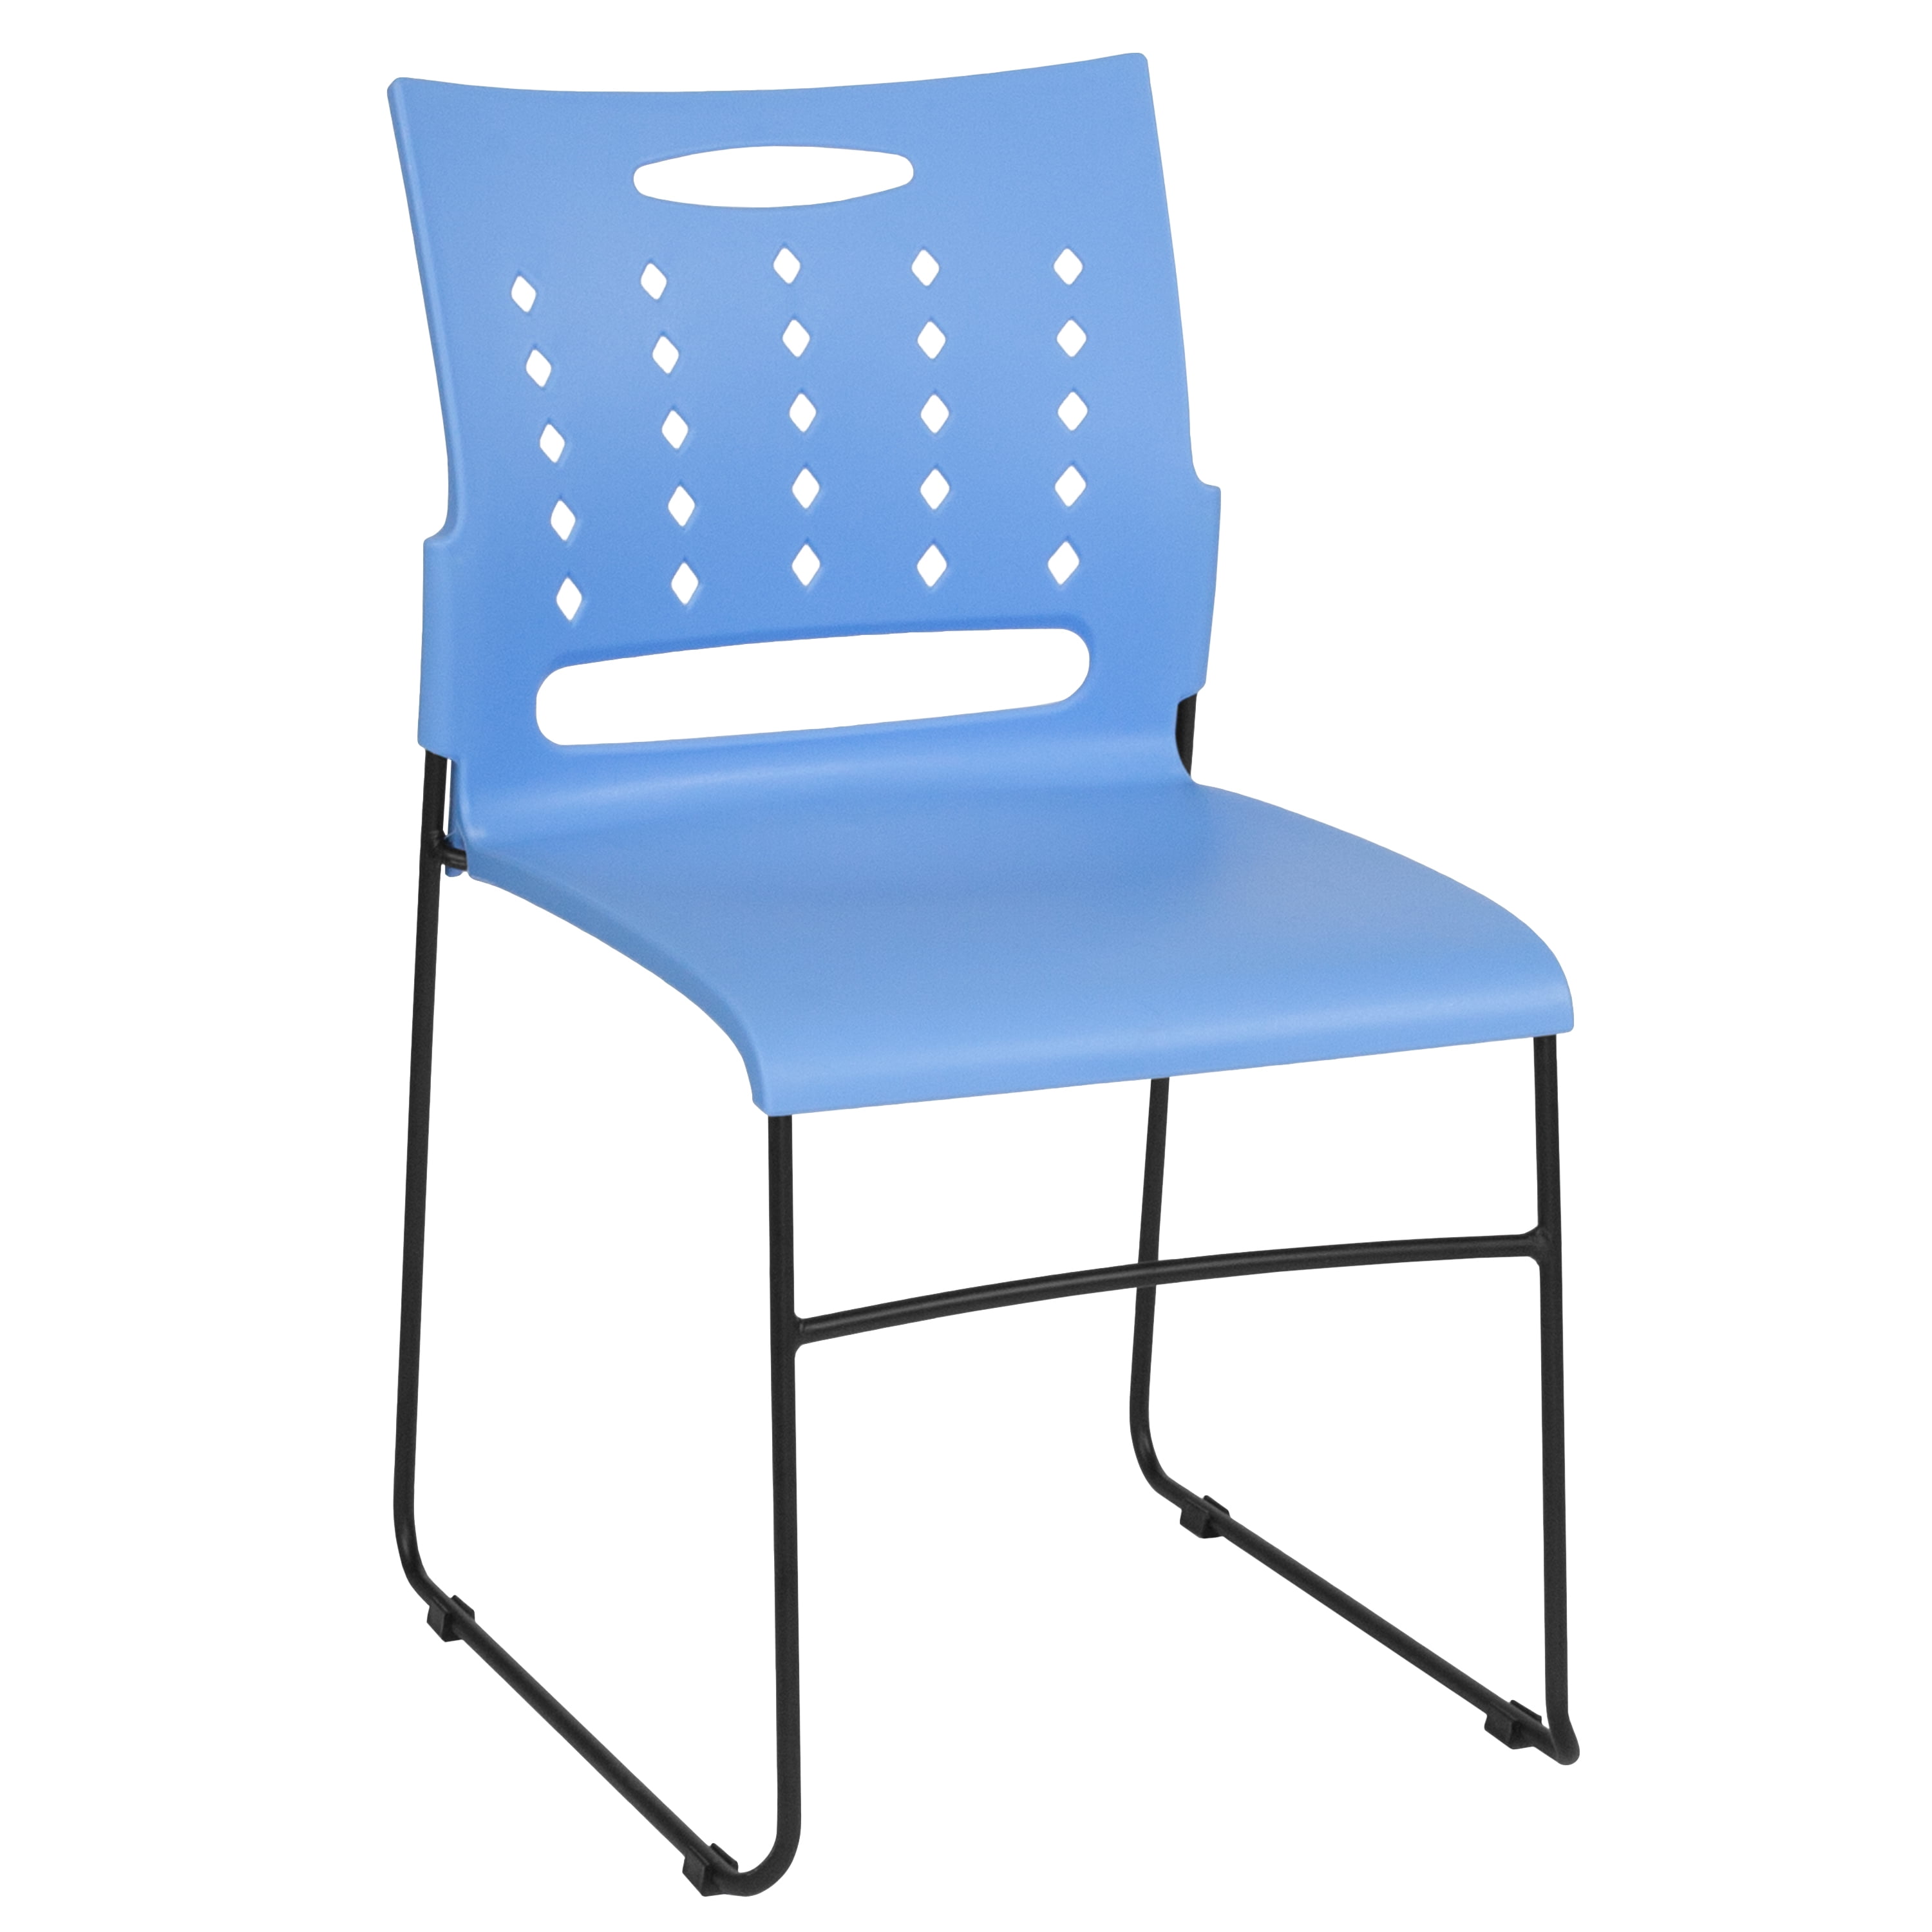 Capacity Yellow Sled Base Stack Chair with Air-Vent Back 18 W x 21 D x 33 H Hercules Series 881 lb 